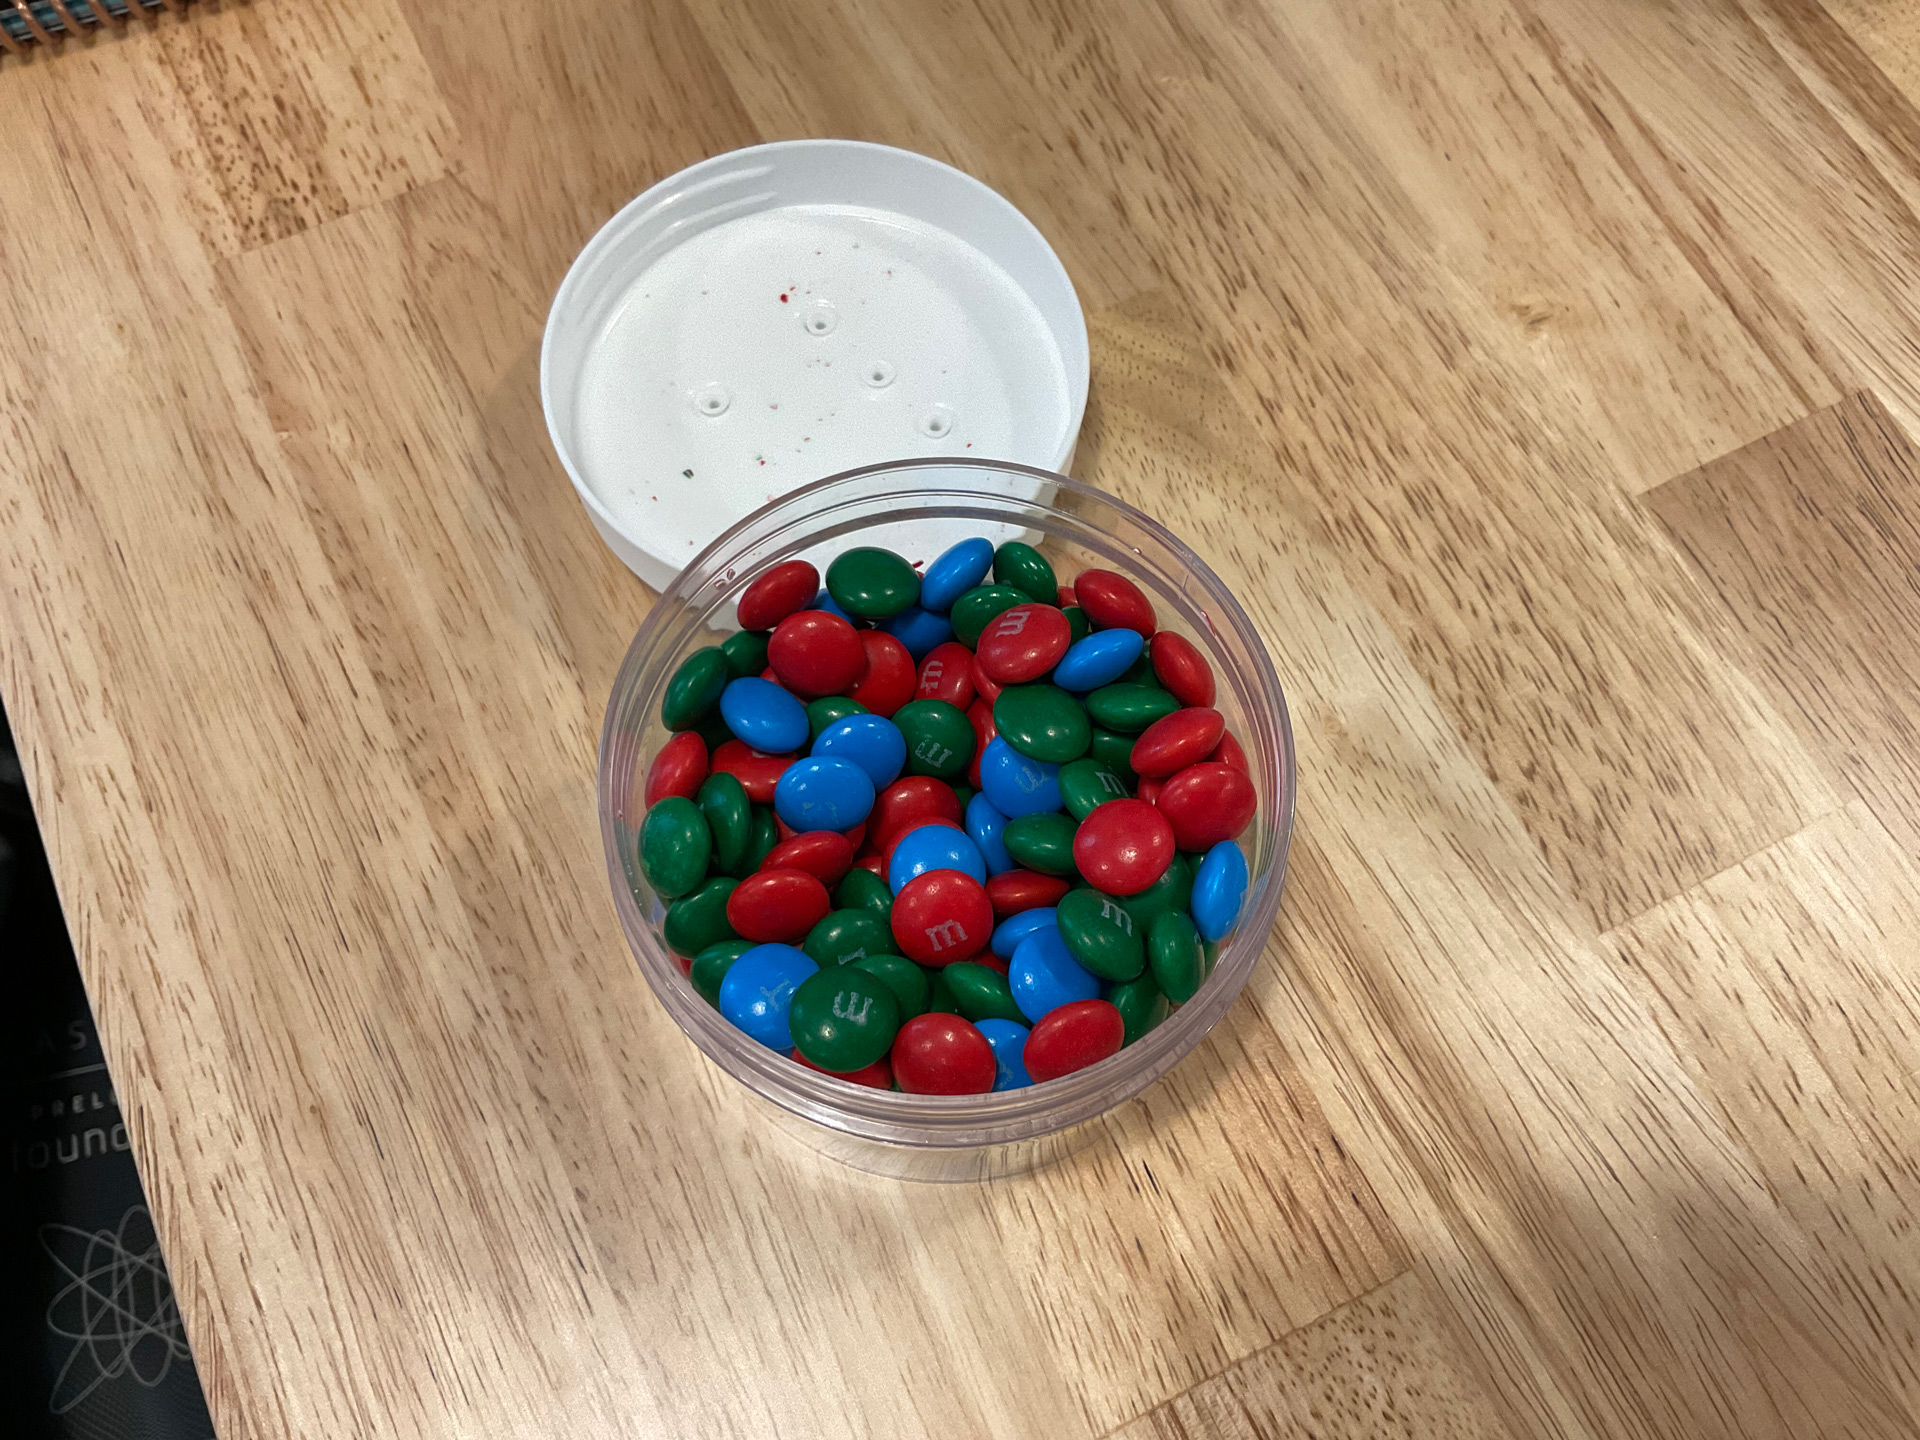 Apple iPad Air 2022 photo of M and Ms